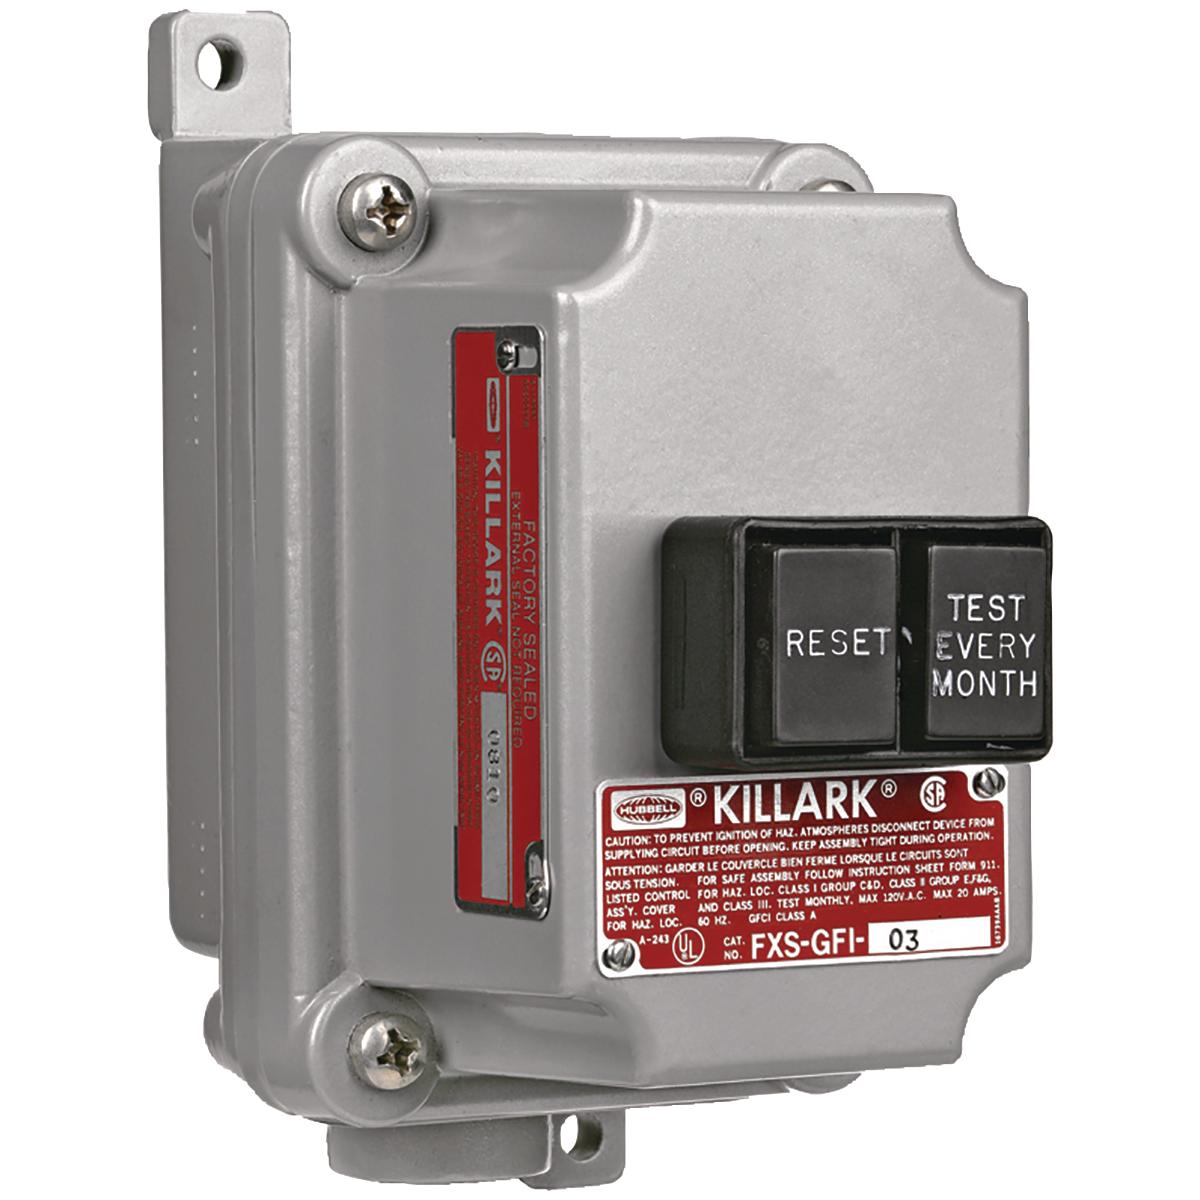 Hubbell FXS-GFI-1020 FXS Series - Aluminum Dead-End Ground Fault Interrupter Unit - Factory Sealed - Hub Size 1/2 Inch - 20A/120Vac/60Hz - 4-6 Miliamp Trip Setting  ; Eliminates external sealing requirements. ; Lower installation cost. ; NEMA 3 weatherproof. ; Color coded wir